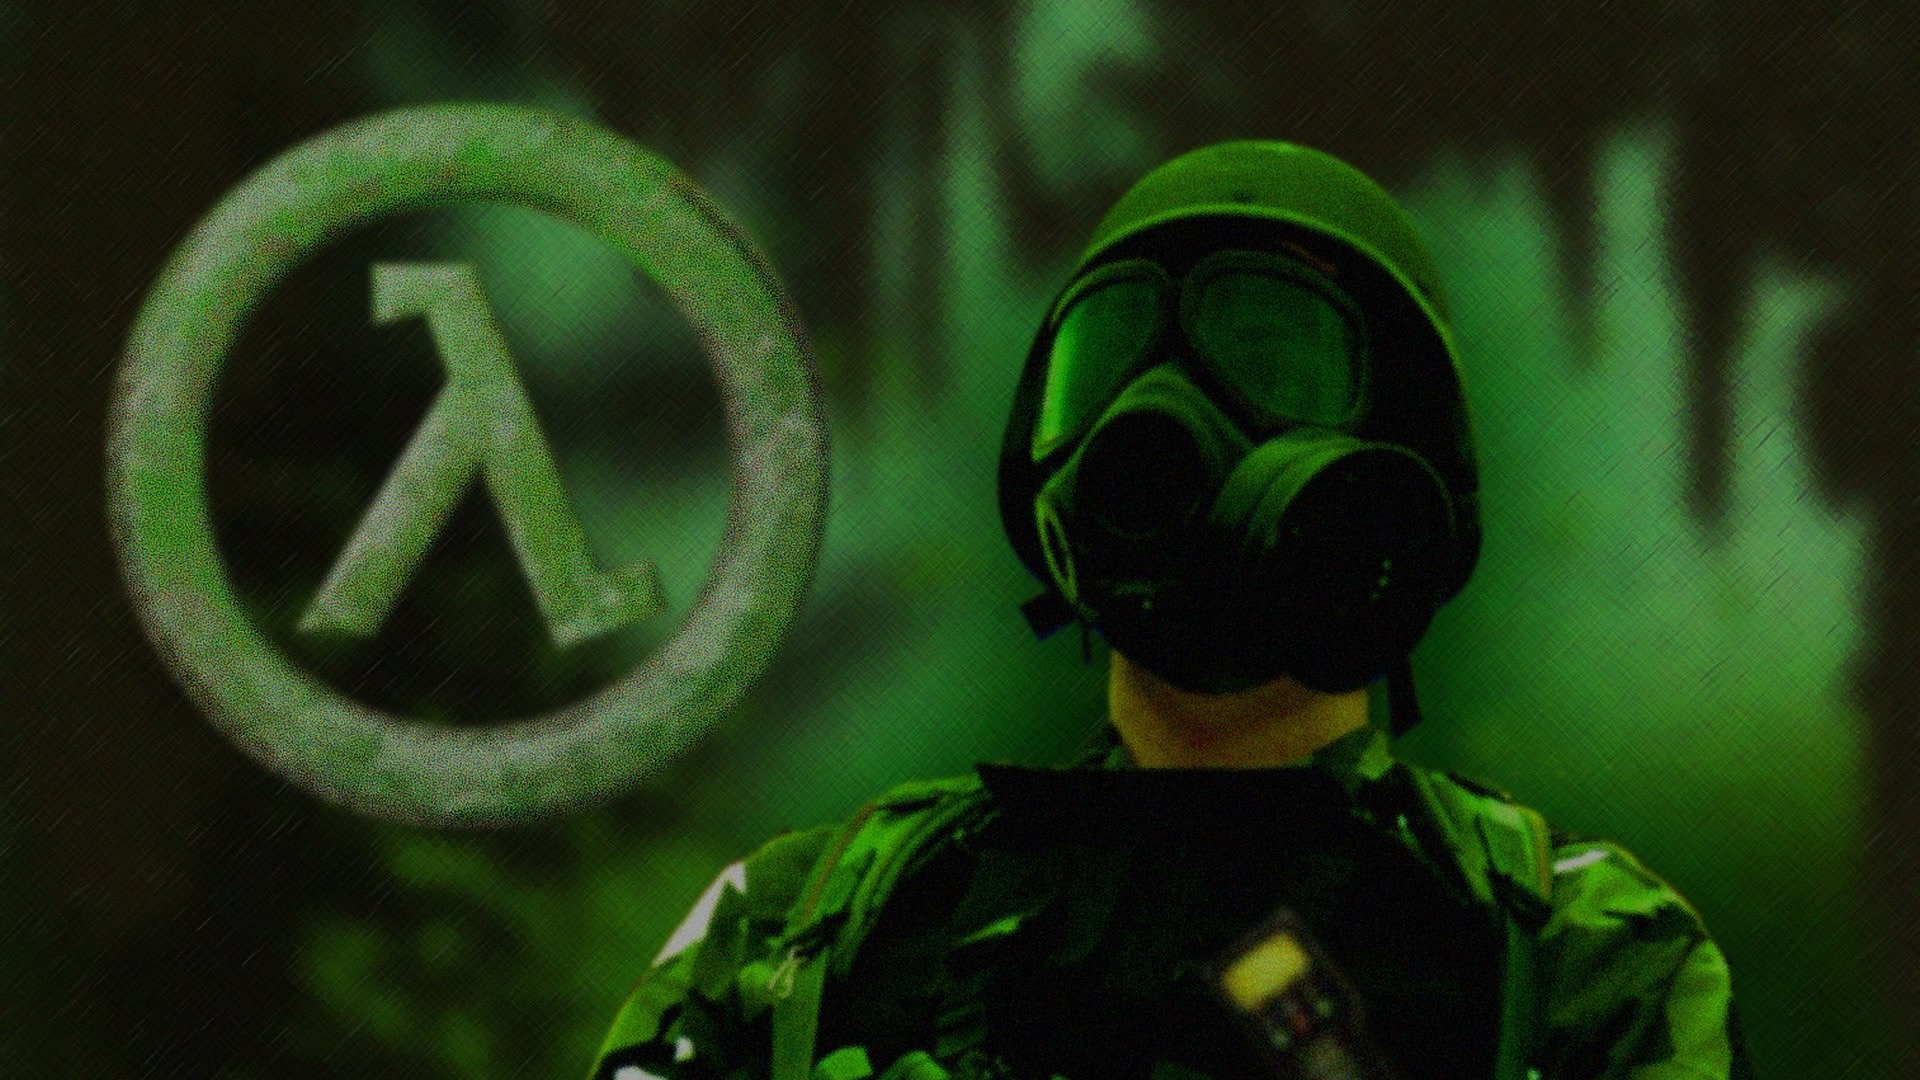 half life opposing force, green color, one person, headshot